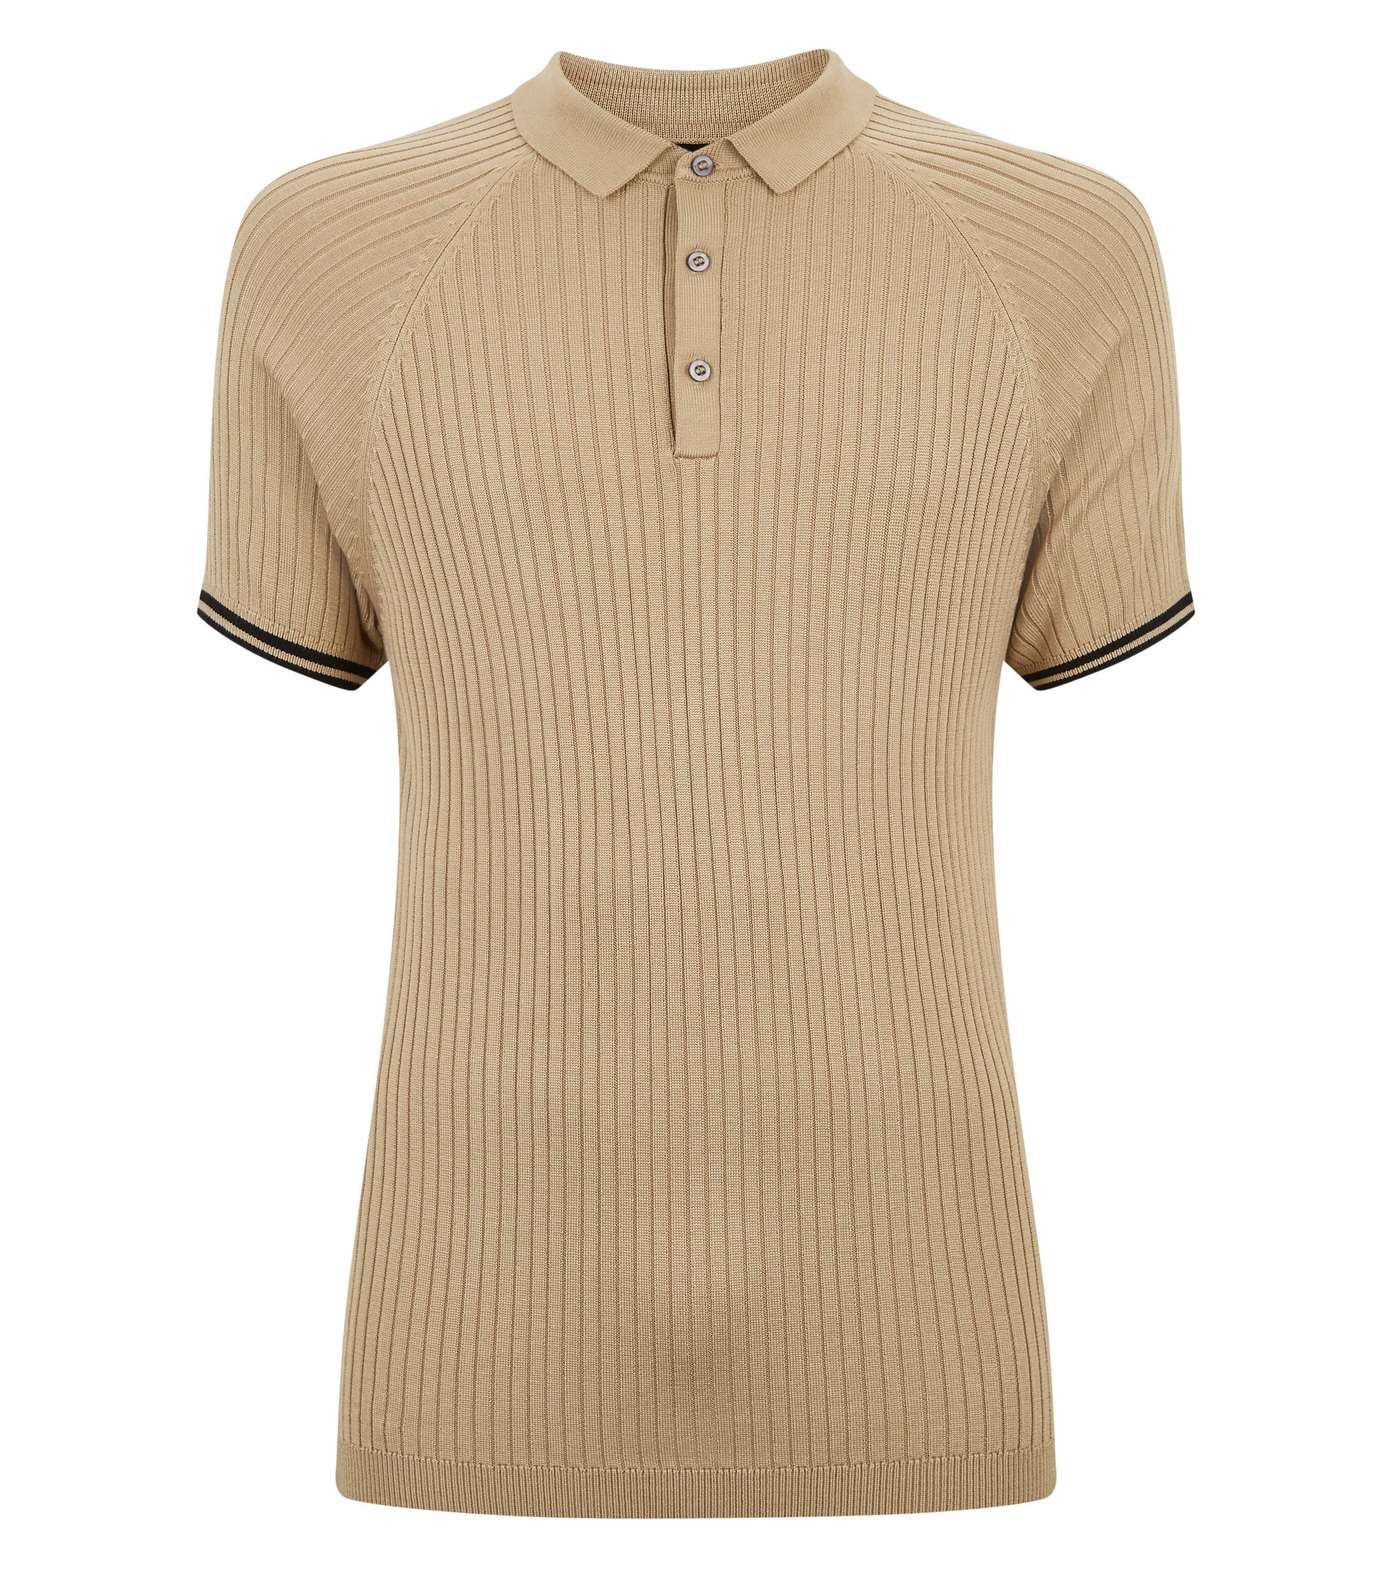 Camel Stripe Sleeve Muscle Fit Polo Shirt Image 4